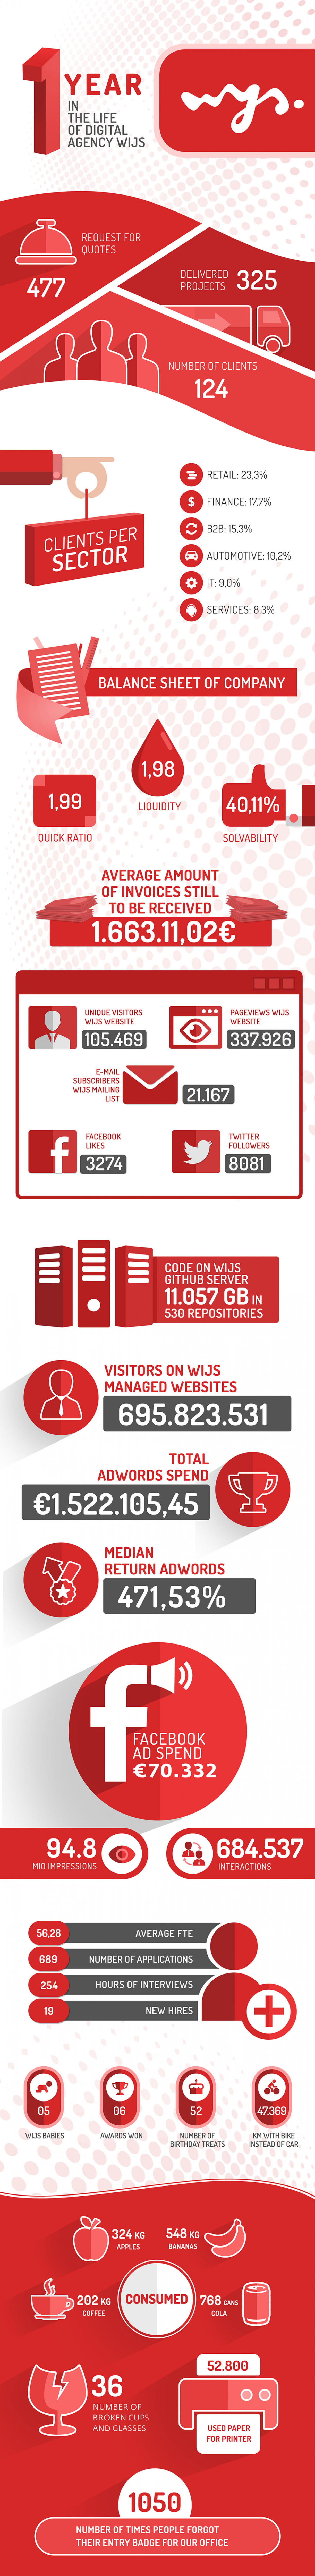 First year in the life of digital agency WIJS Infographic